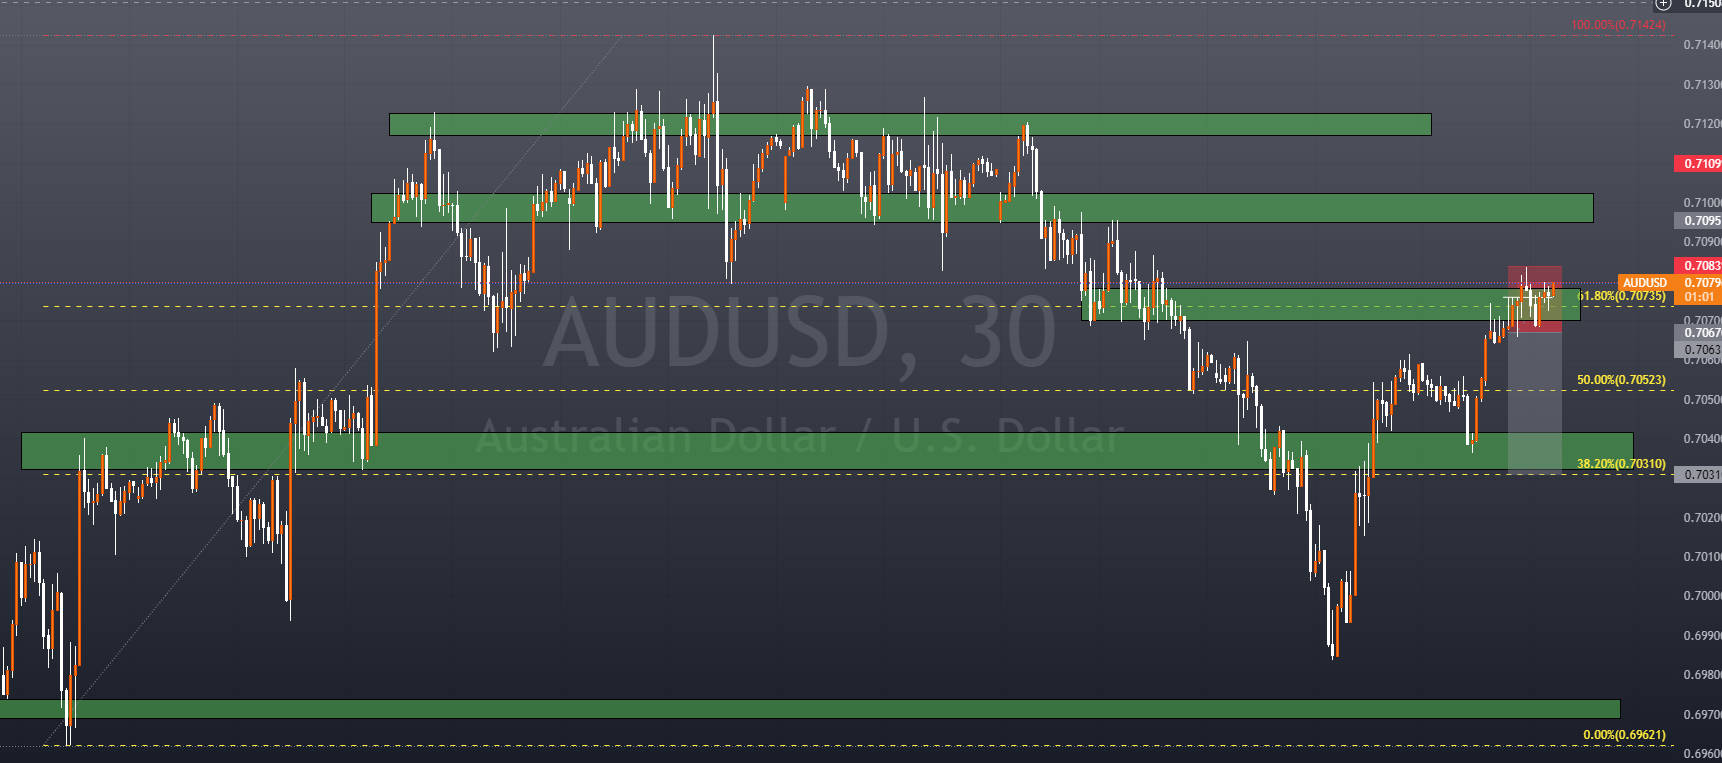 AUD/USD M30 Break and Retest with .618 feb level